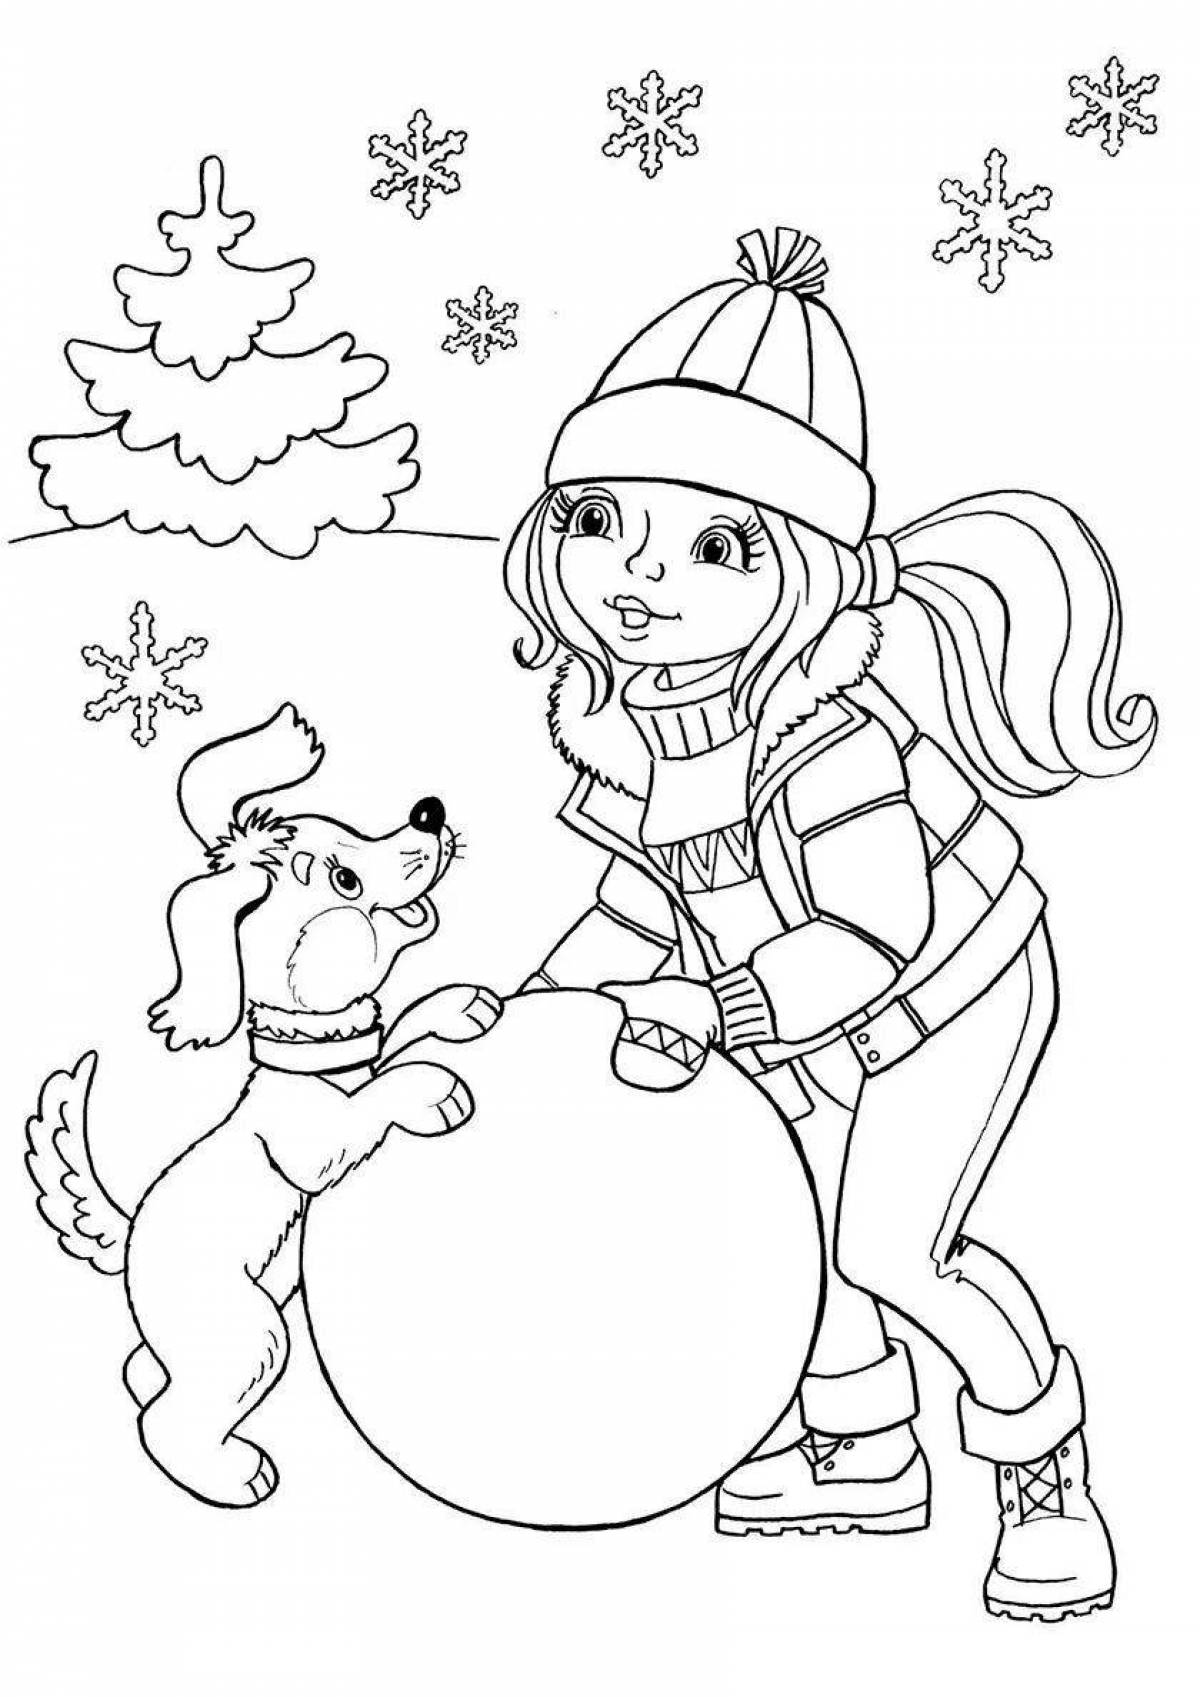 Spicy 5 year old winter coloring book